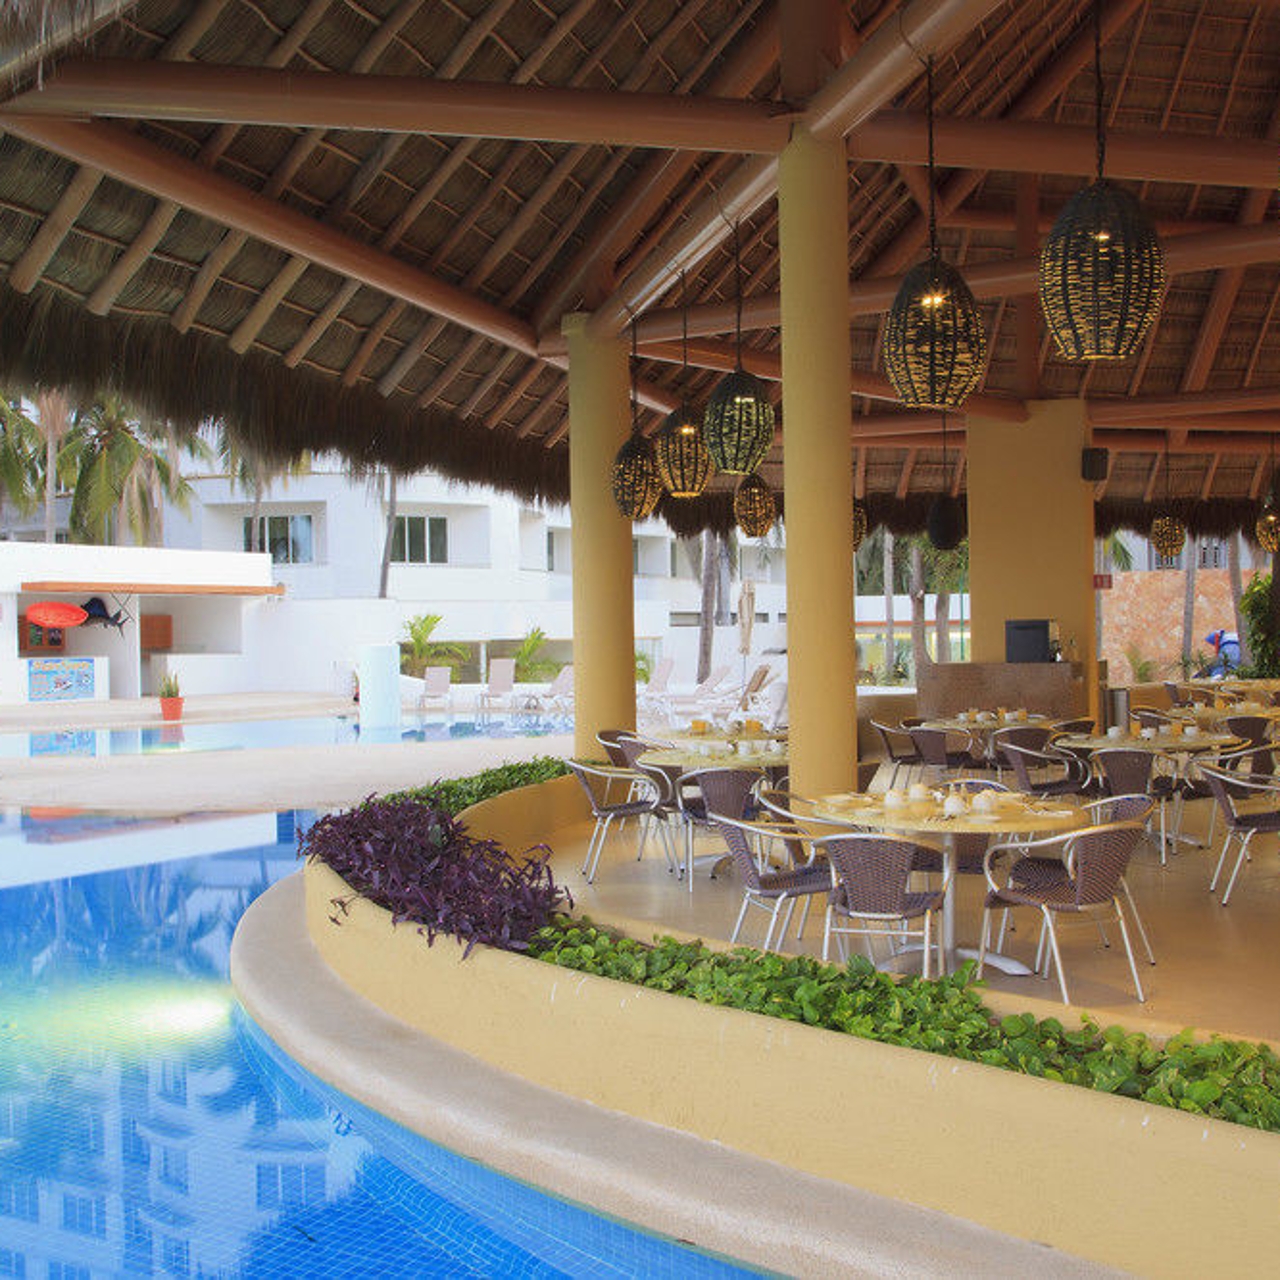 Hotel Krystal Vallarta Mexico At Hrs With Free Services